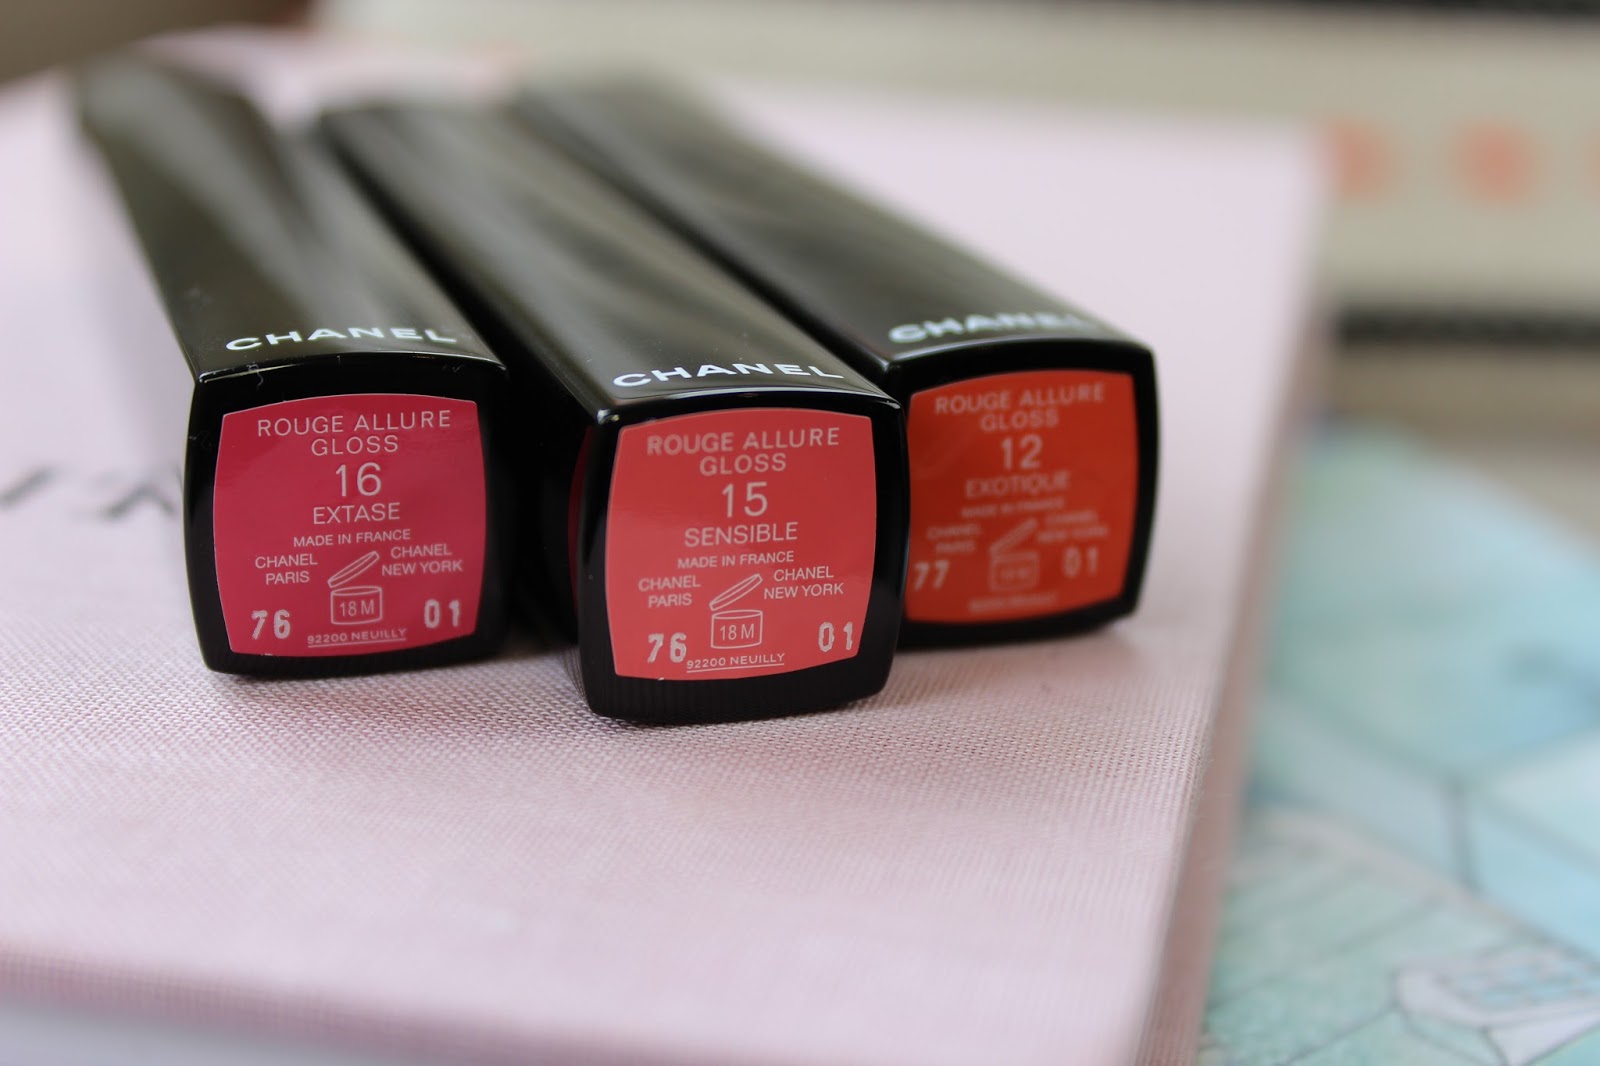 CHANEL ROUGE ALLURE GLOSS – Lily Pebbles